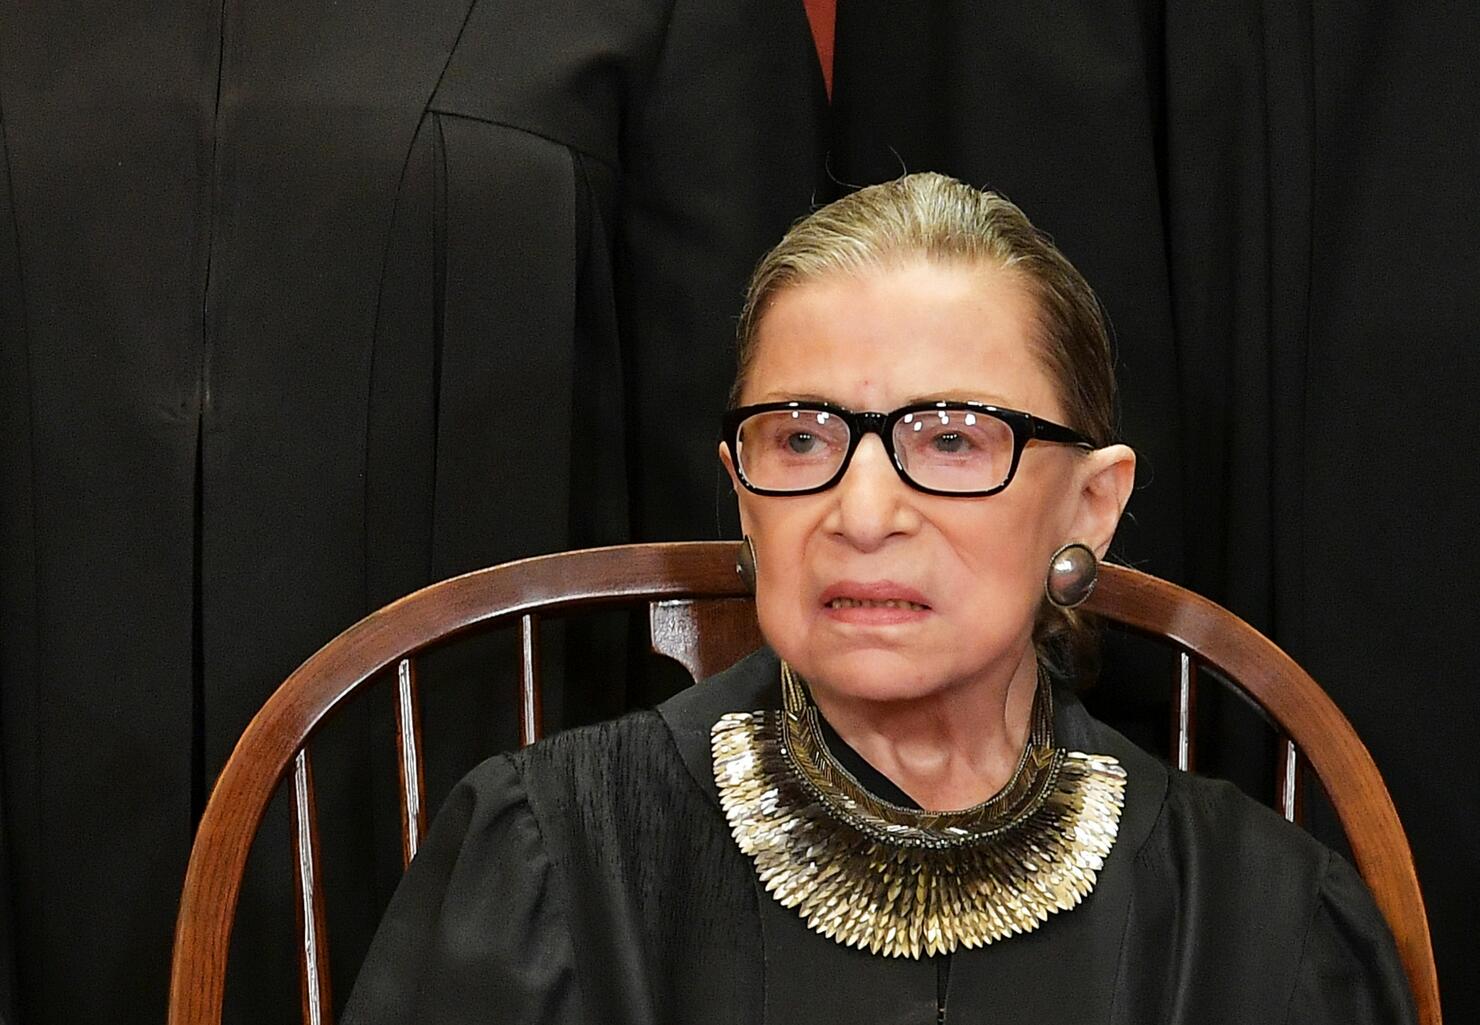 Justice Ruth Bader Ginsburg's recovery from cancer surgery is "on track,"